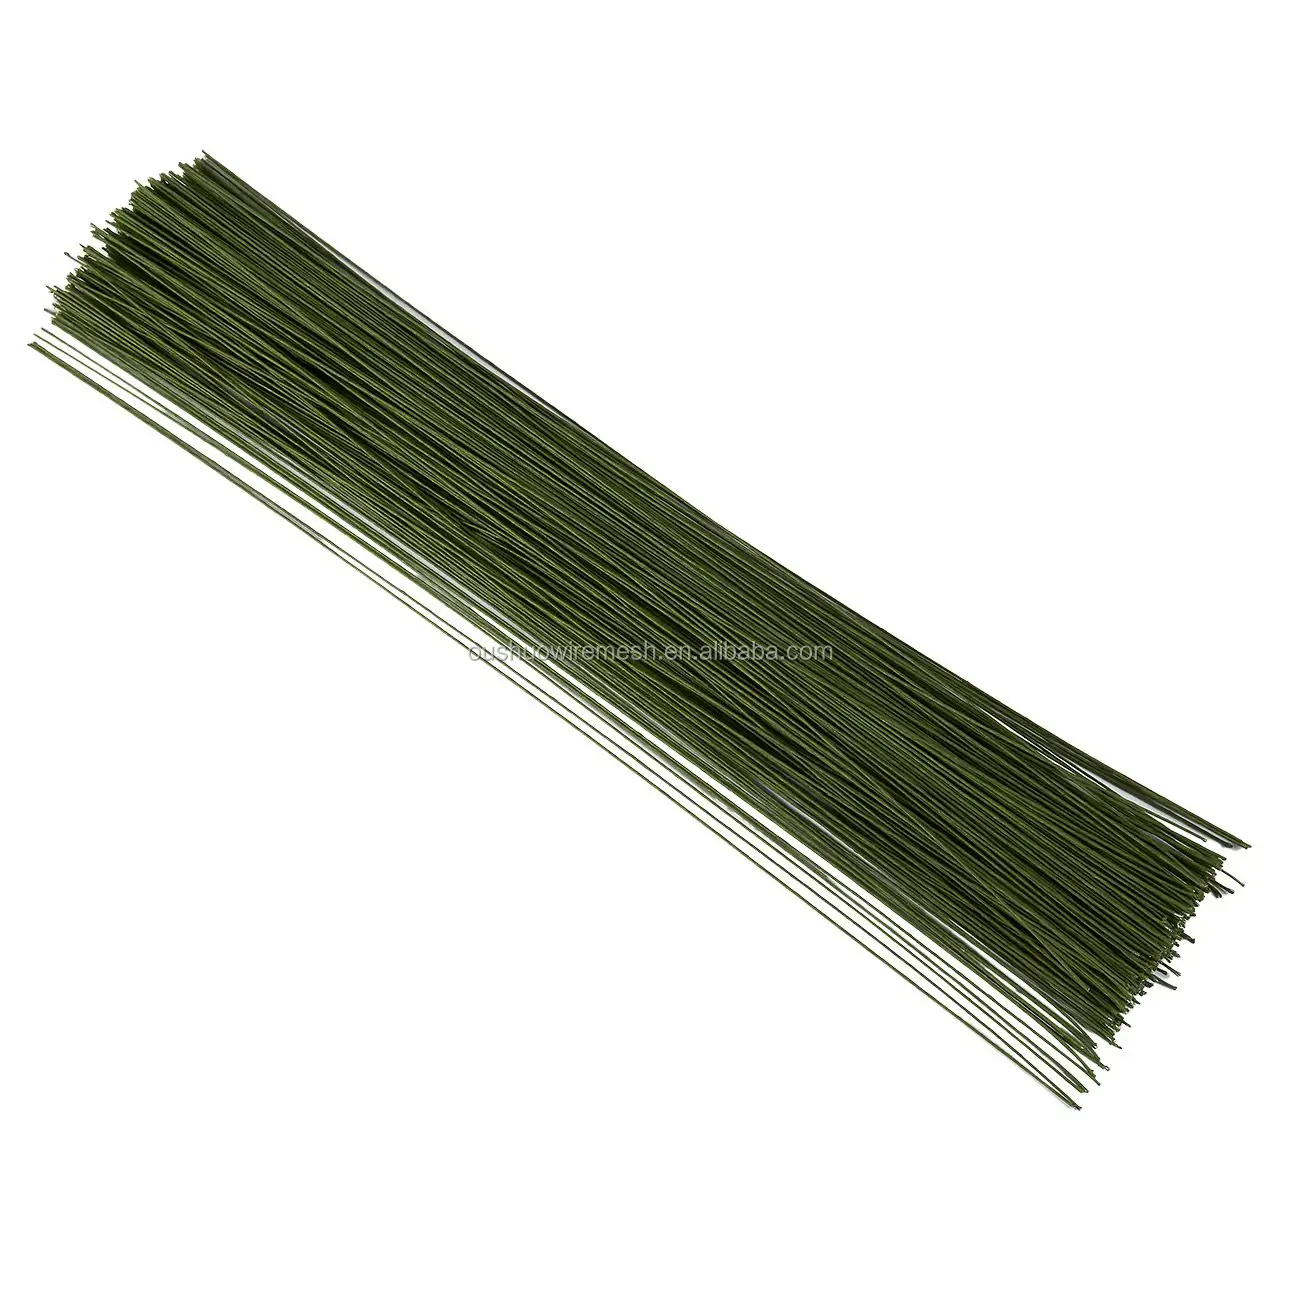 Artificial flower making material supplies 14inch 36cm length green floral wire flower stems craft wire